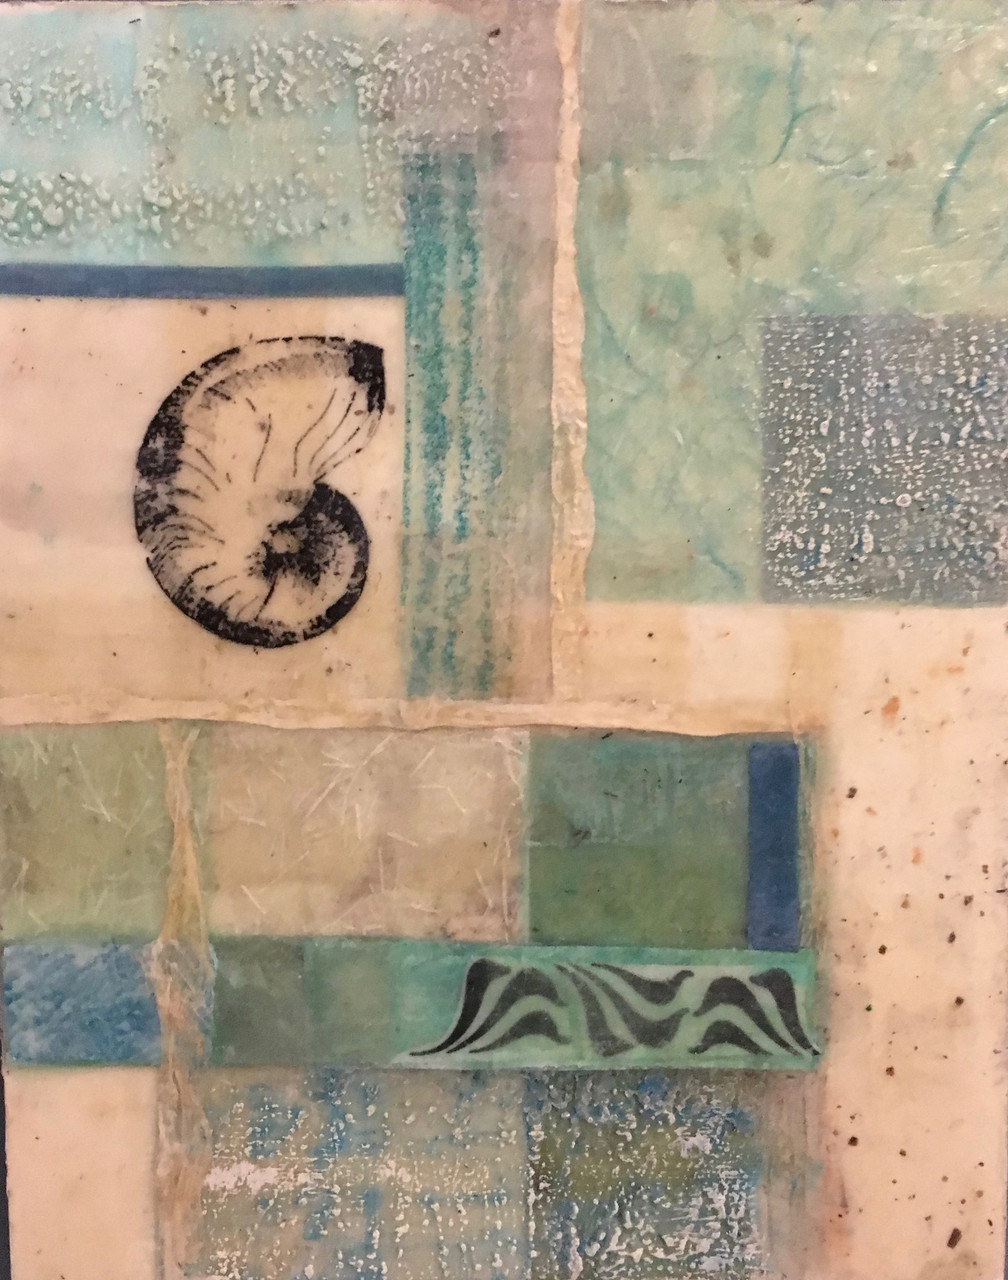 Encaustic with rice papers, transfers, tape and oil stick in teal, cream and blue color waxes.